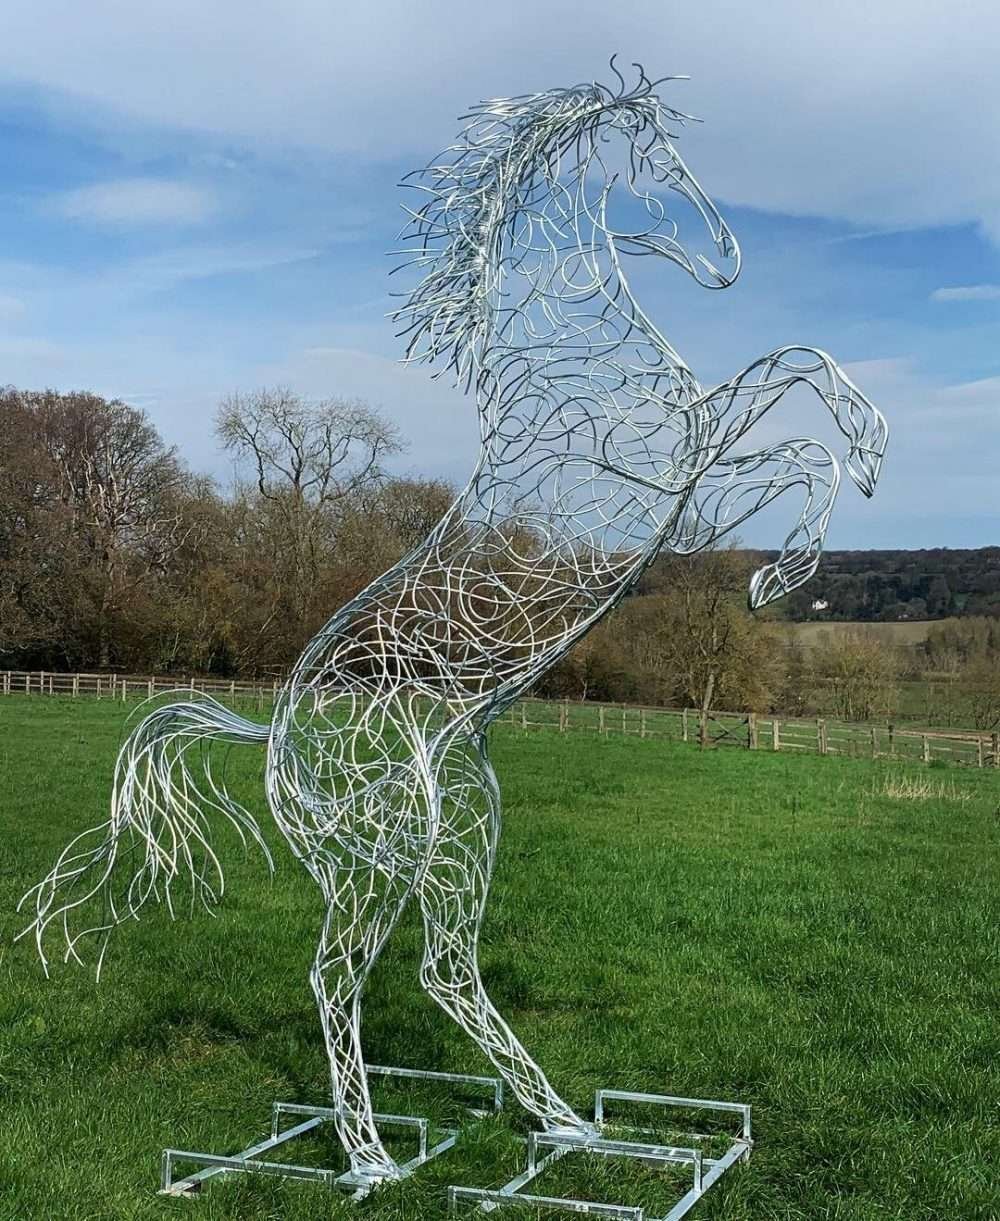 Rearing Horse Sculpture On A Sunny Day